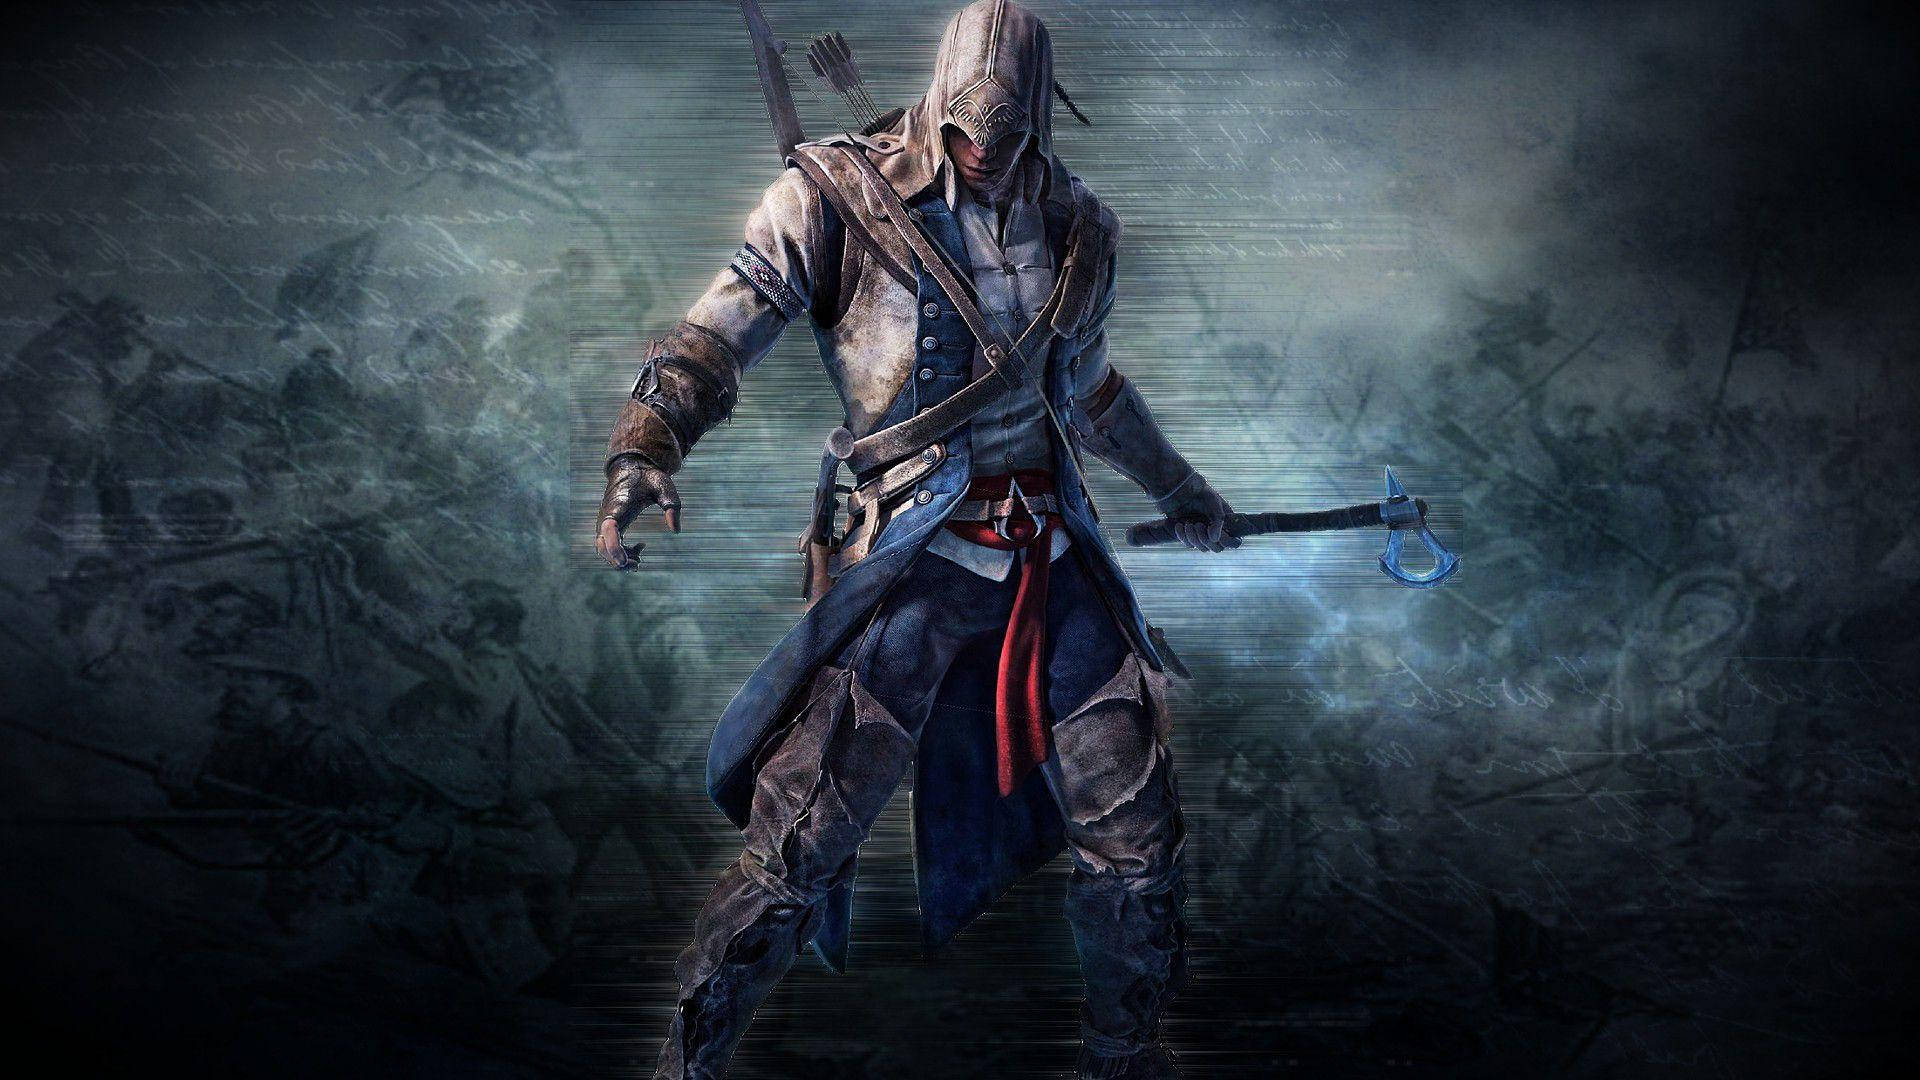 Free Assassin's Creed Wallpaper Downloads, [200+] Assassin's Creed  Wallpapers for FREE 